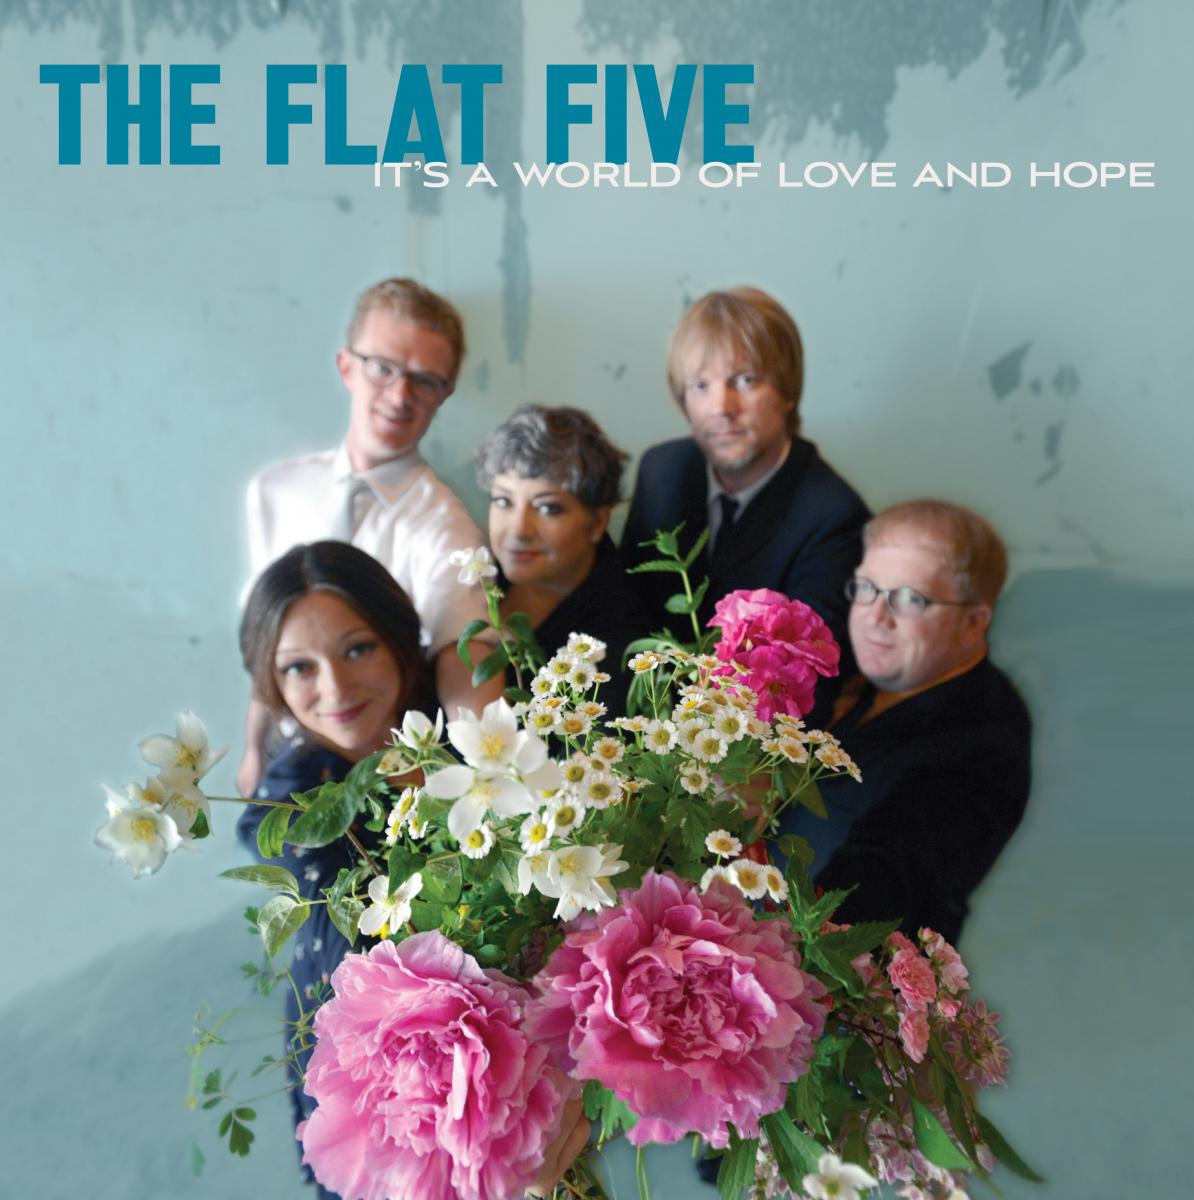 The Flat Five It’s A World of Love and Hope